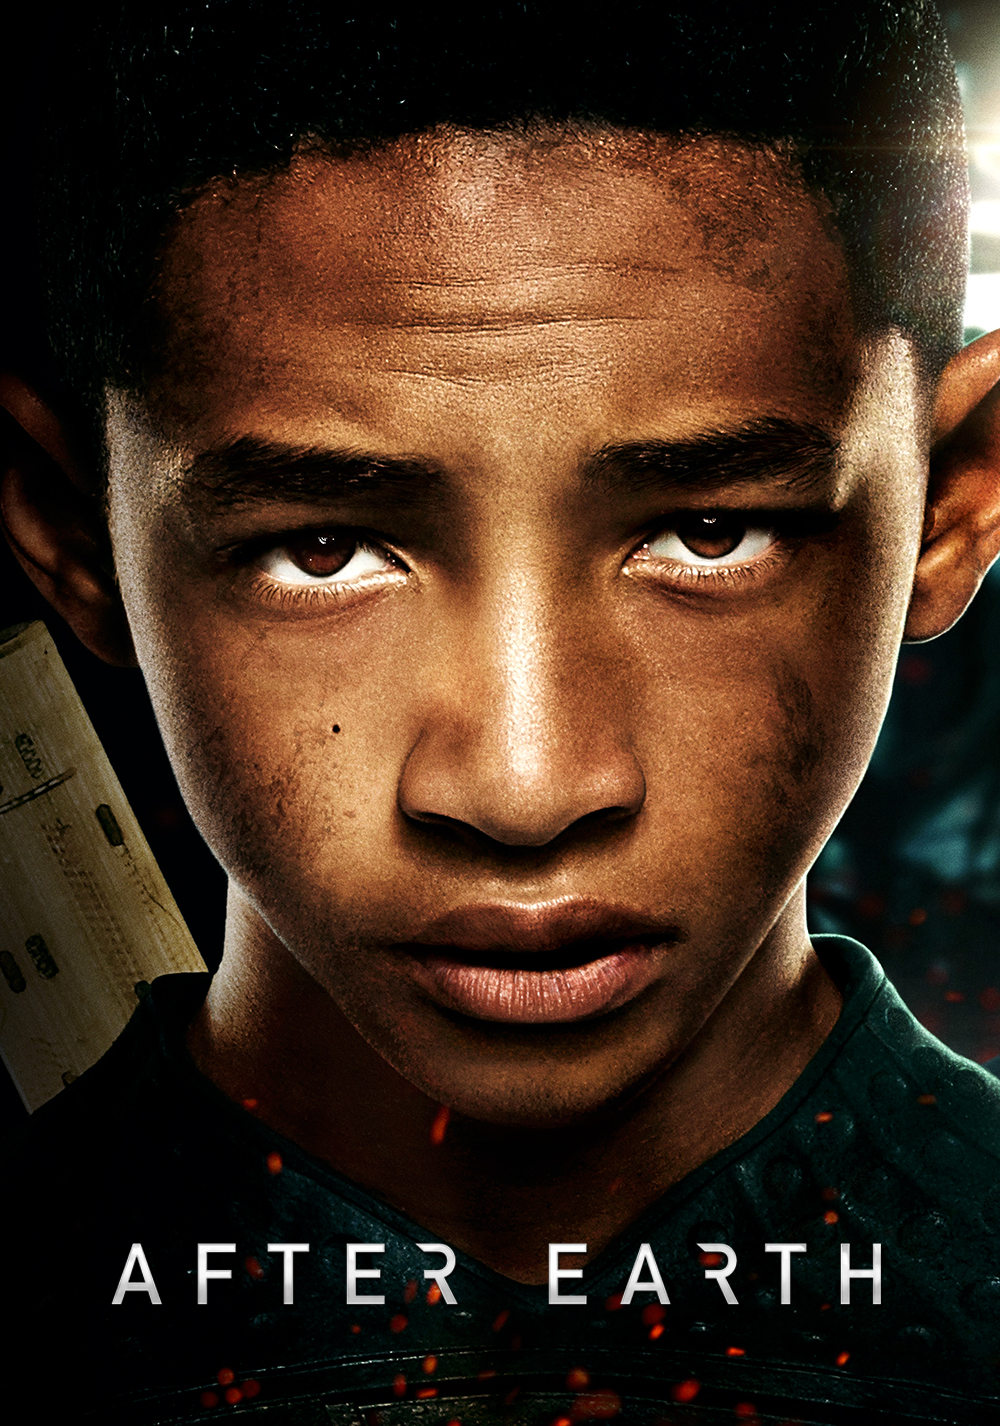 After Earth Movie Poster - ID: 71192 - Image Abyss.